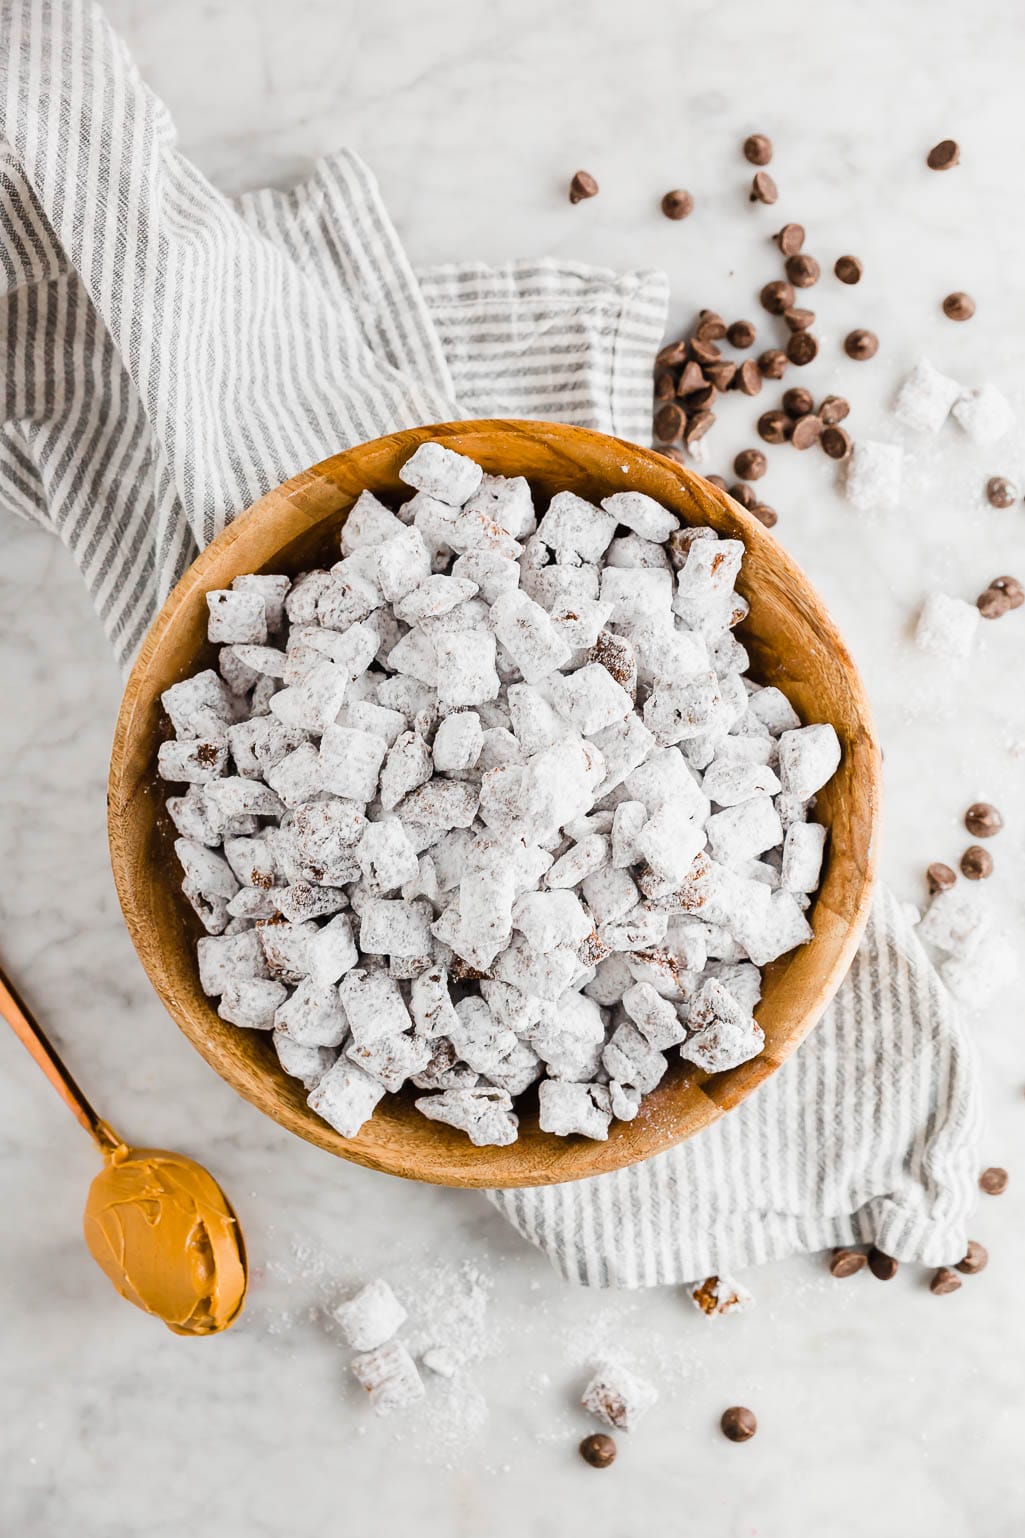 Dairy-free puppy chow in a wooden bowl with a spoonful of peanut butter and chocolate chips and powdered sugar on a linen napkin and table.